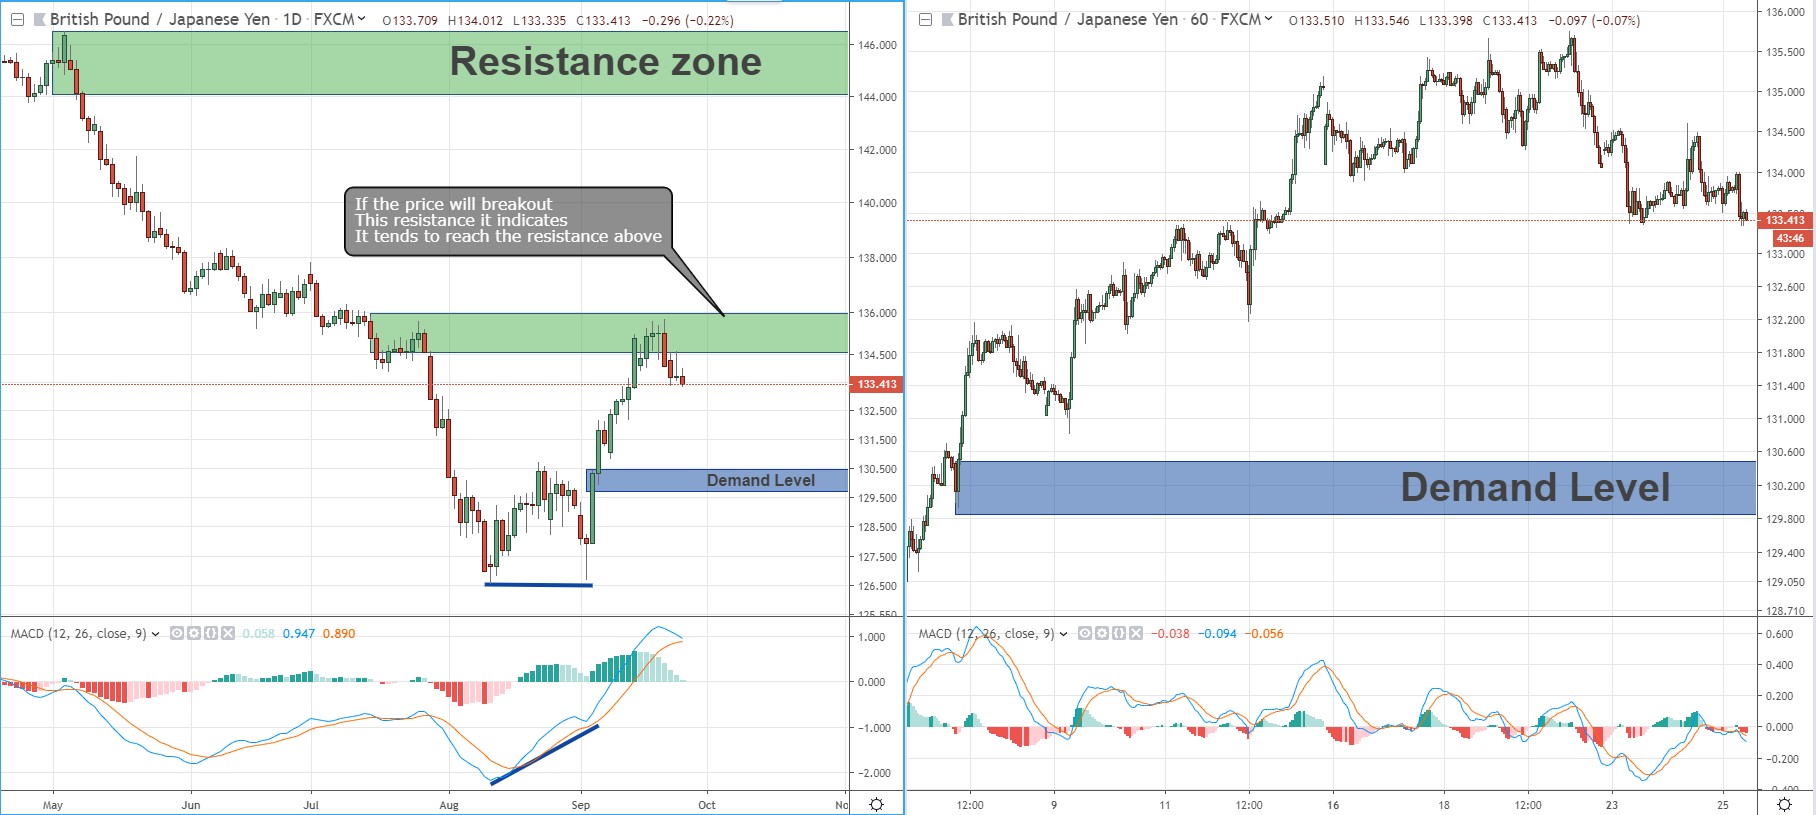 GBP/JPY Performed a Double Bottom